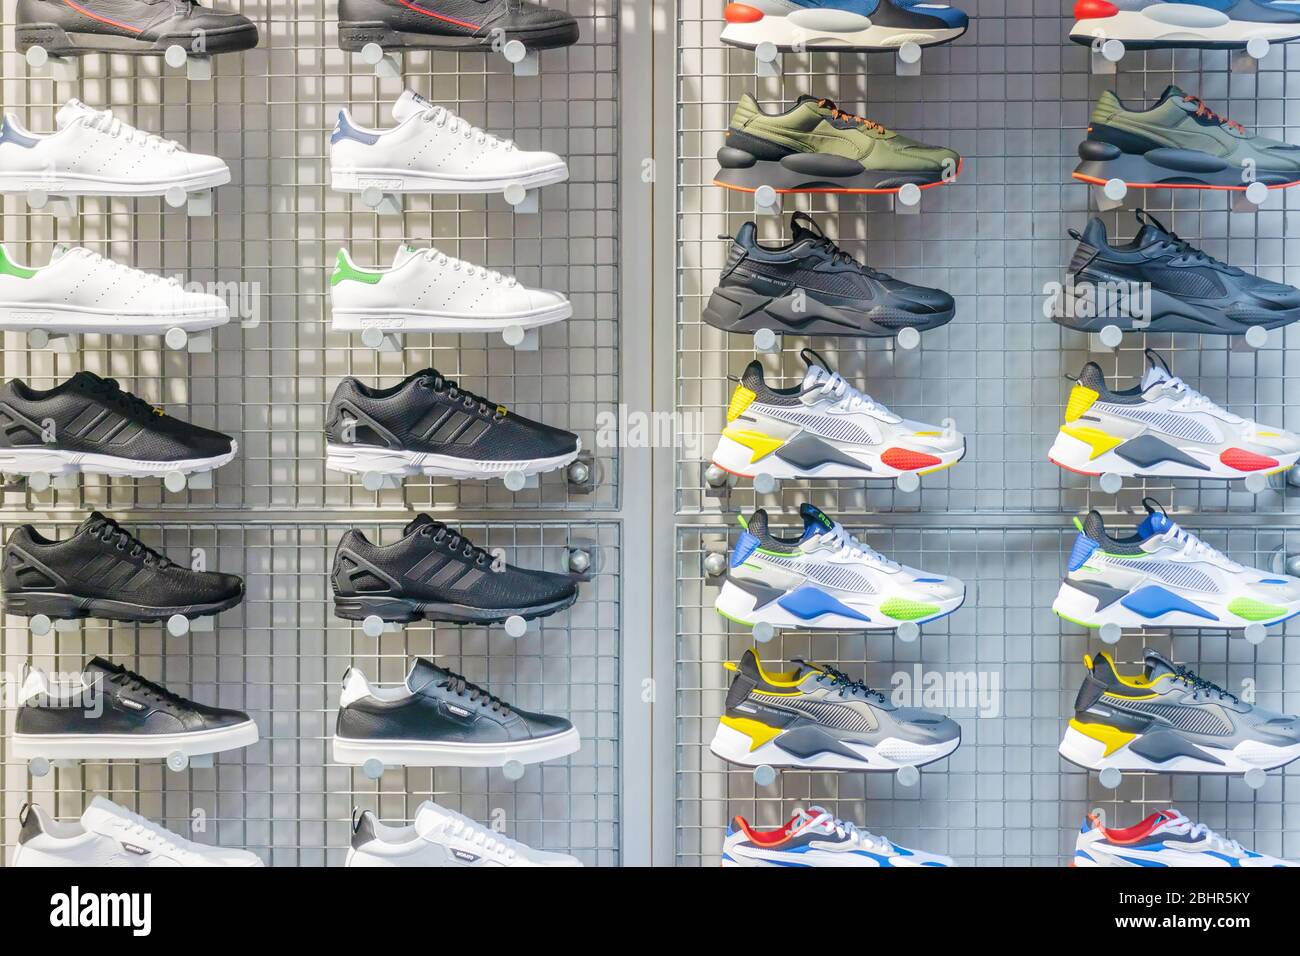 Leiden, The Netherlands - January 16, 2020: Display of different sports shoes in a store window in Leiden, The Netherlands Stock Photo